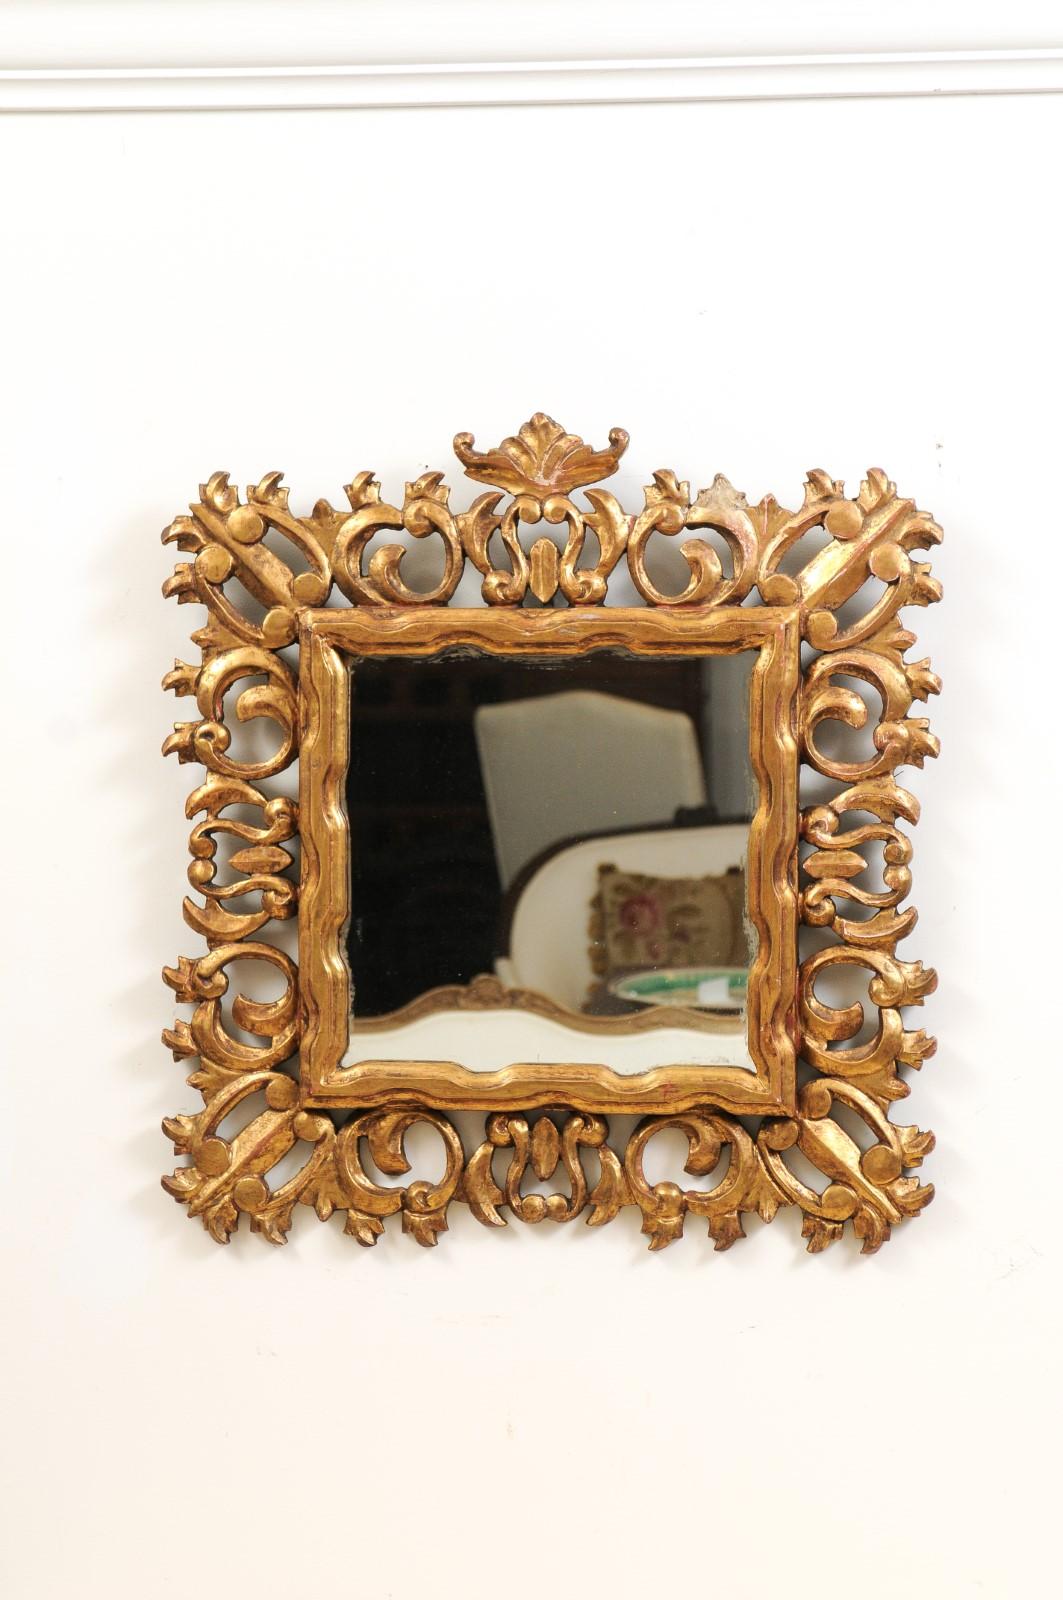 An Italian Florentine wall mirror from the 20th century, with carved giltwood frame. Created in Florence during the 20th century, this Tuscan mirror features a clear rectangular mirror plate surrounded by a faux-bois inspired inner molding. It is